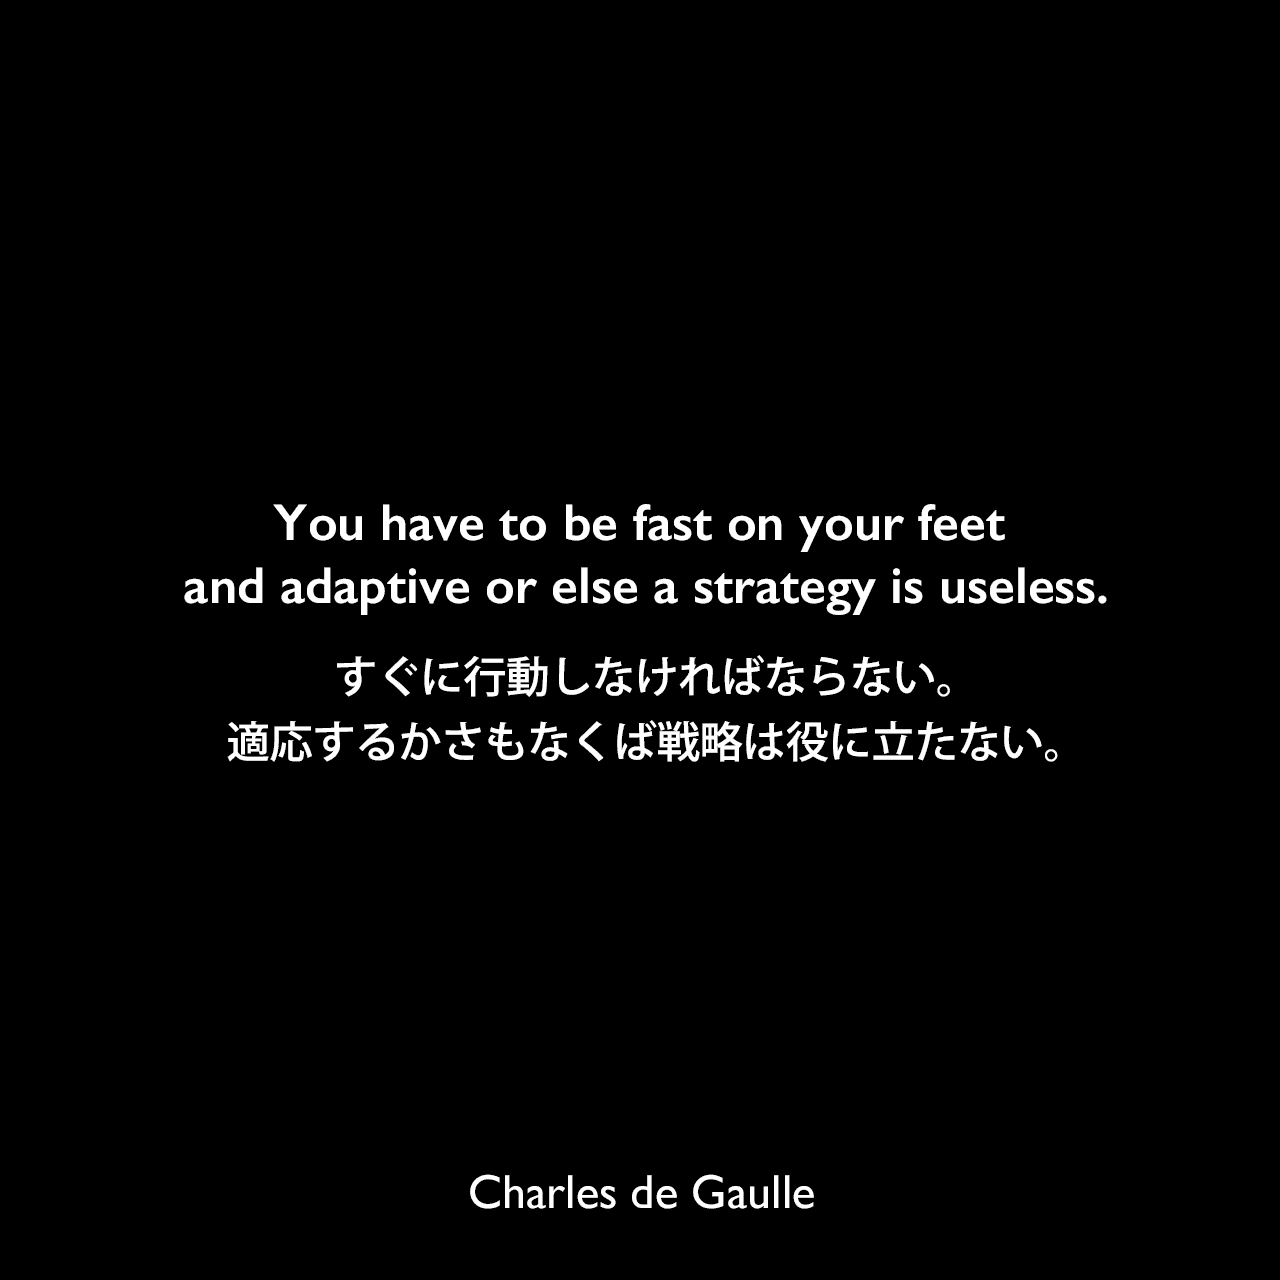 You have to be fast on your feet and adaptive or else a strategy is useless.すぐに行動しなければならない。適応するかさもなくば戦略は役に立たない。